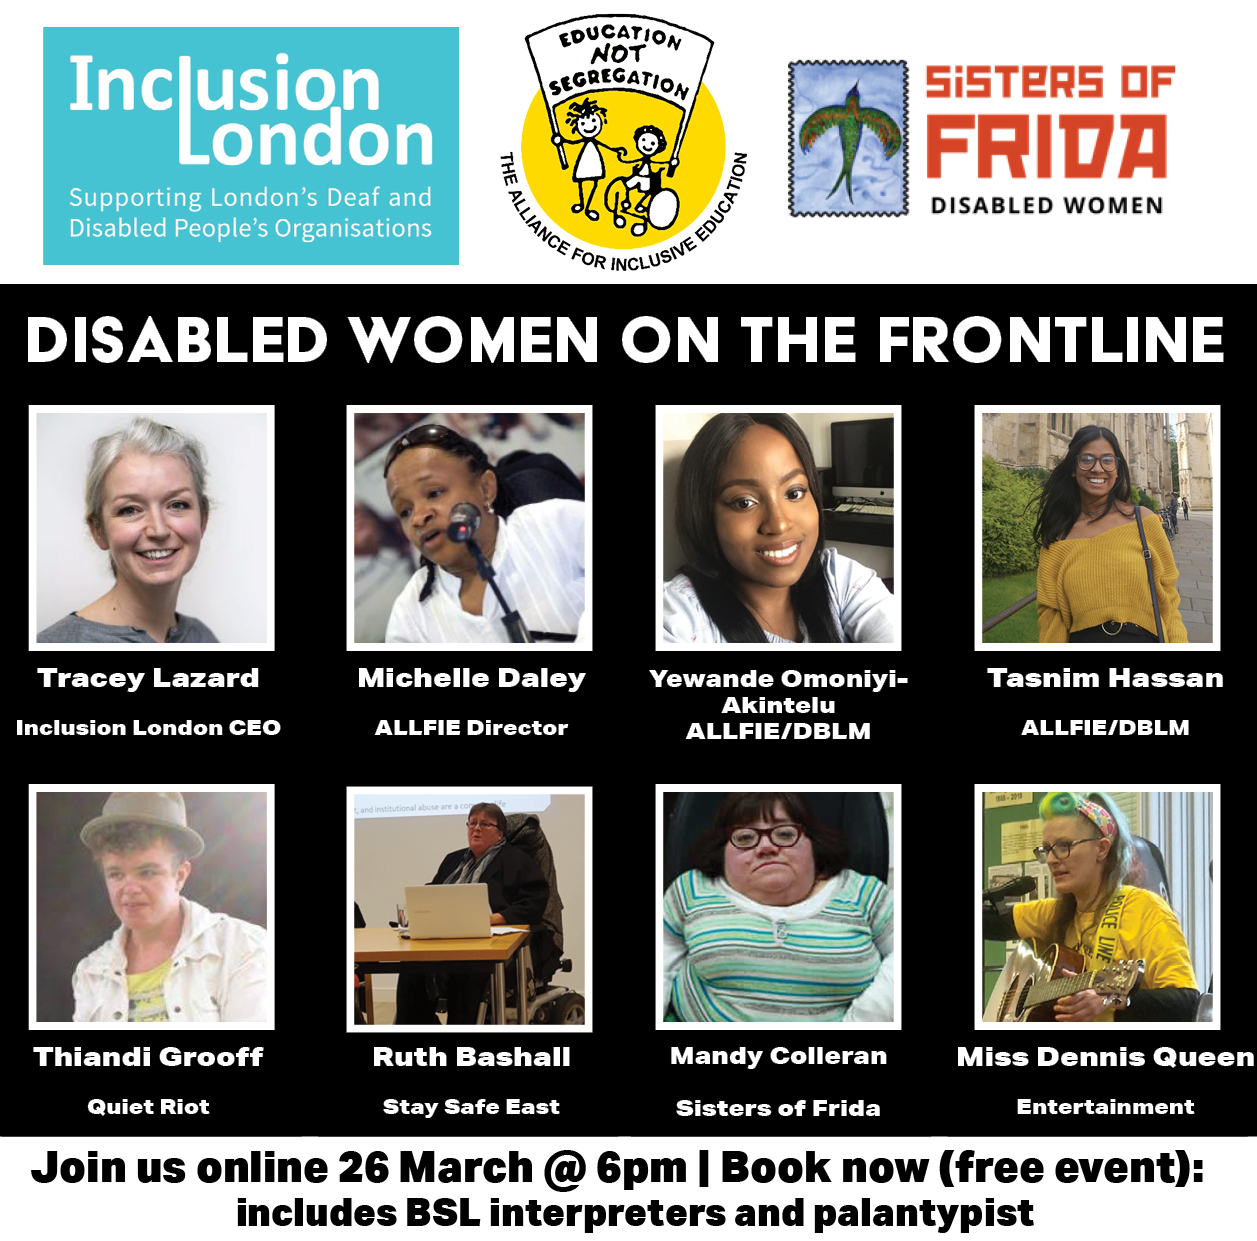 Disabled Women on the Frontline event flyer listing panelists: Tracey Lazard; Michelle Daley; Yewande Omoniyi-Akintelu; Tasnim Hassan; Thiandi Groof; Ruth Bashall; Mandy Colleran; Miss Dennis Queen. Includes logos for Inclusion London, ALLFIE and Sisters of Frida.